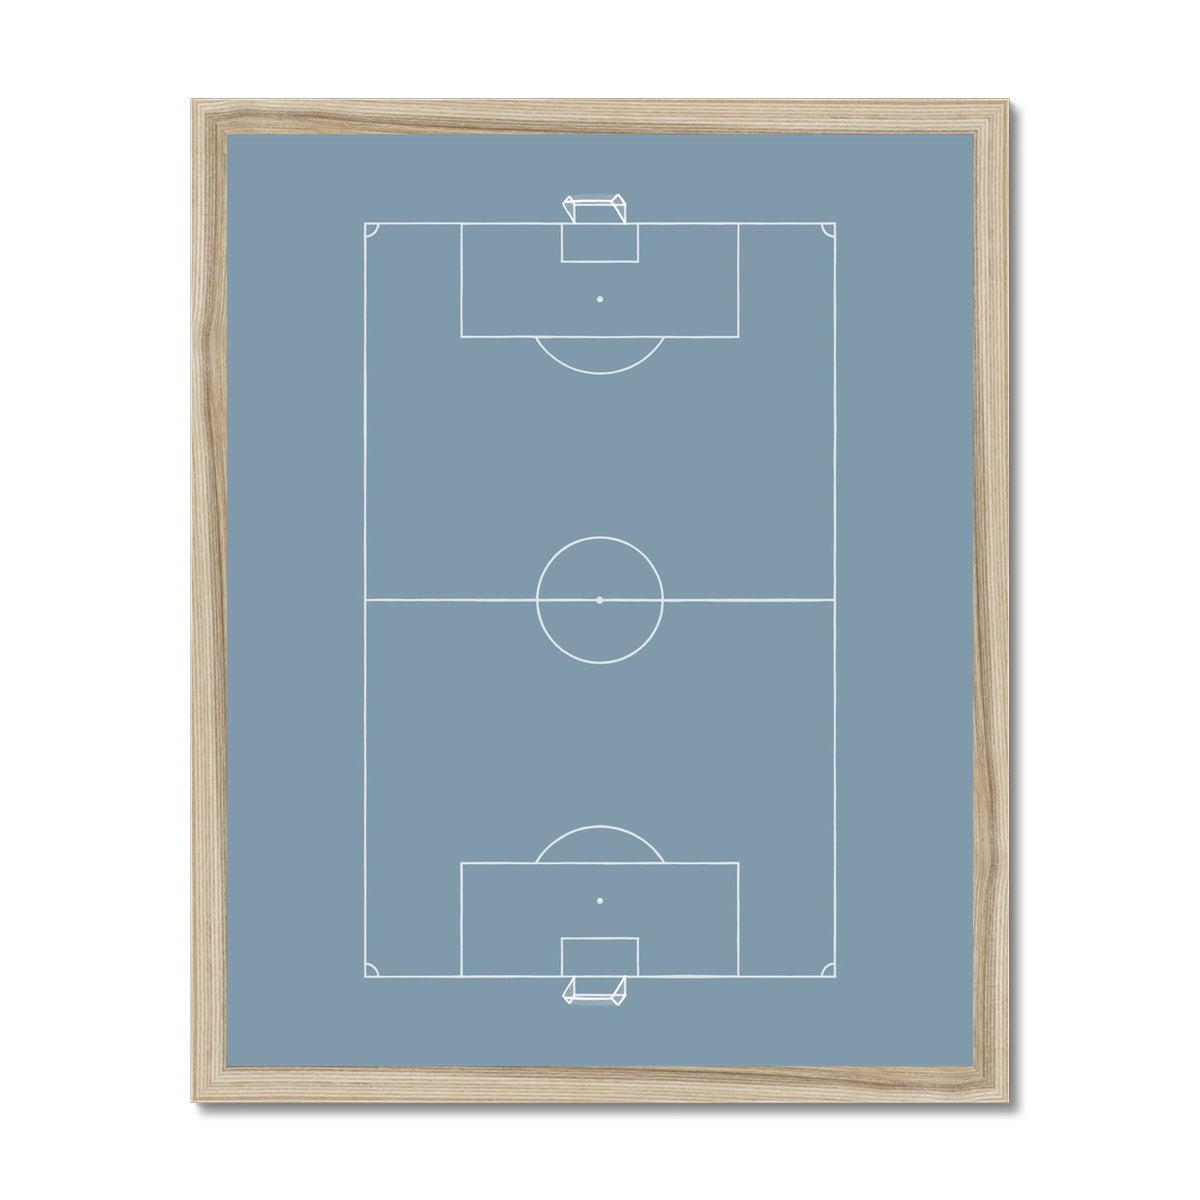 Football in pitch in blue / Framed Print